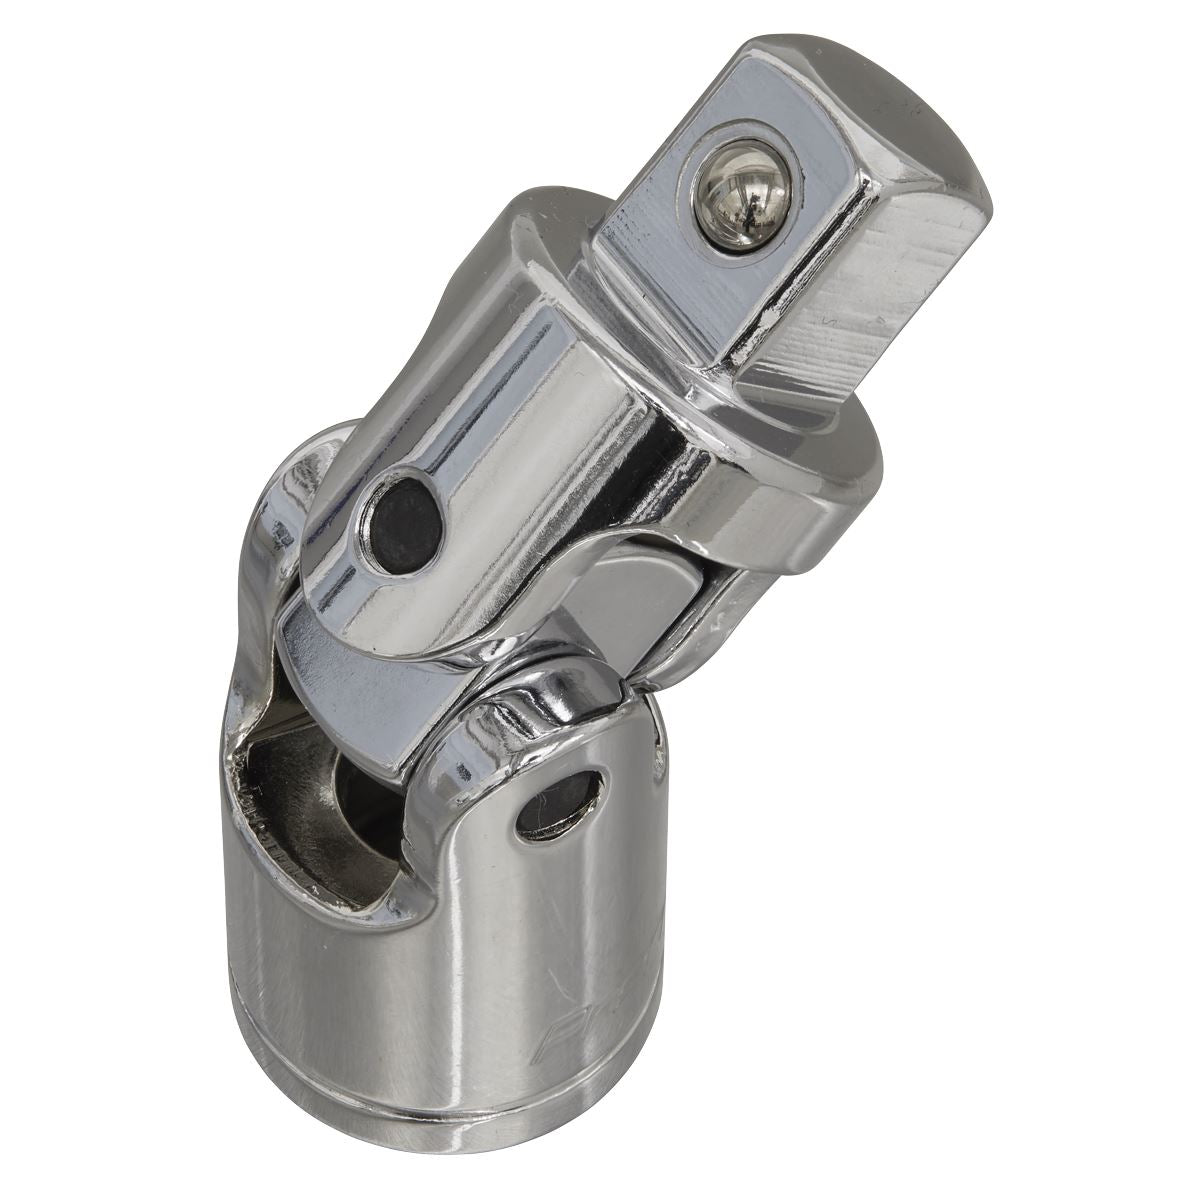 Sealey Premier Universal Joint 1/2"Sq Drive